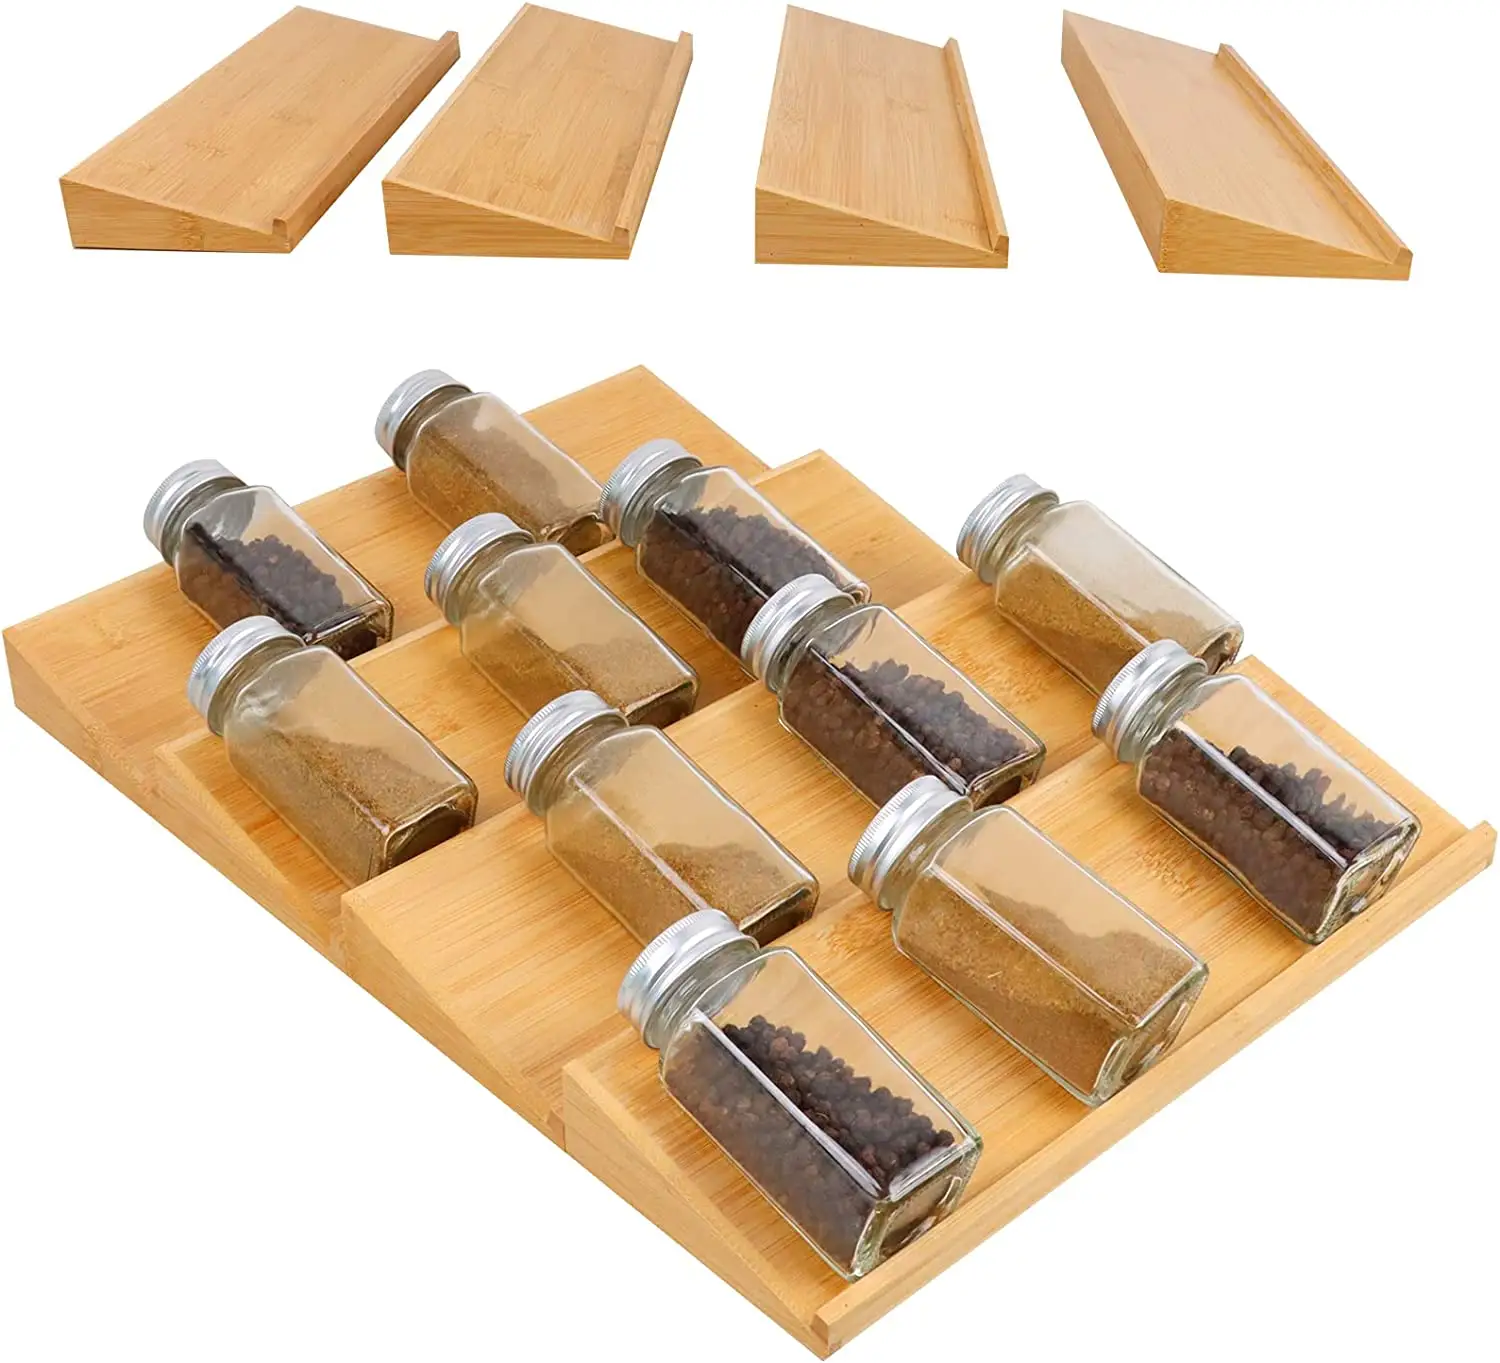 Bamboo Spice Rack Organizer Home Storage And Organization Spice Rack Organizer Kitchen